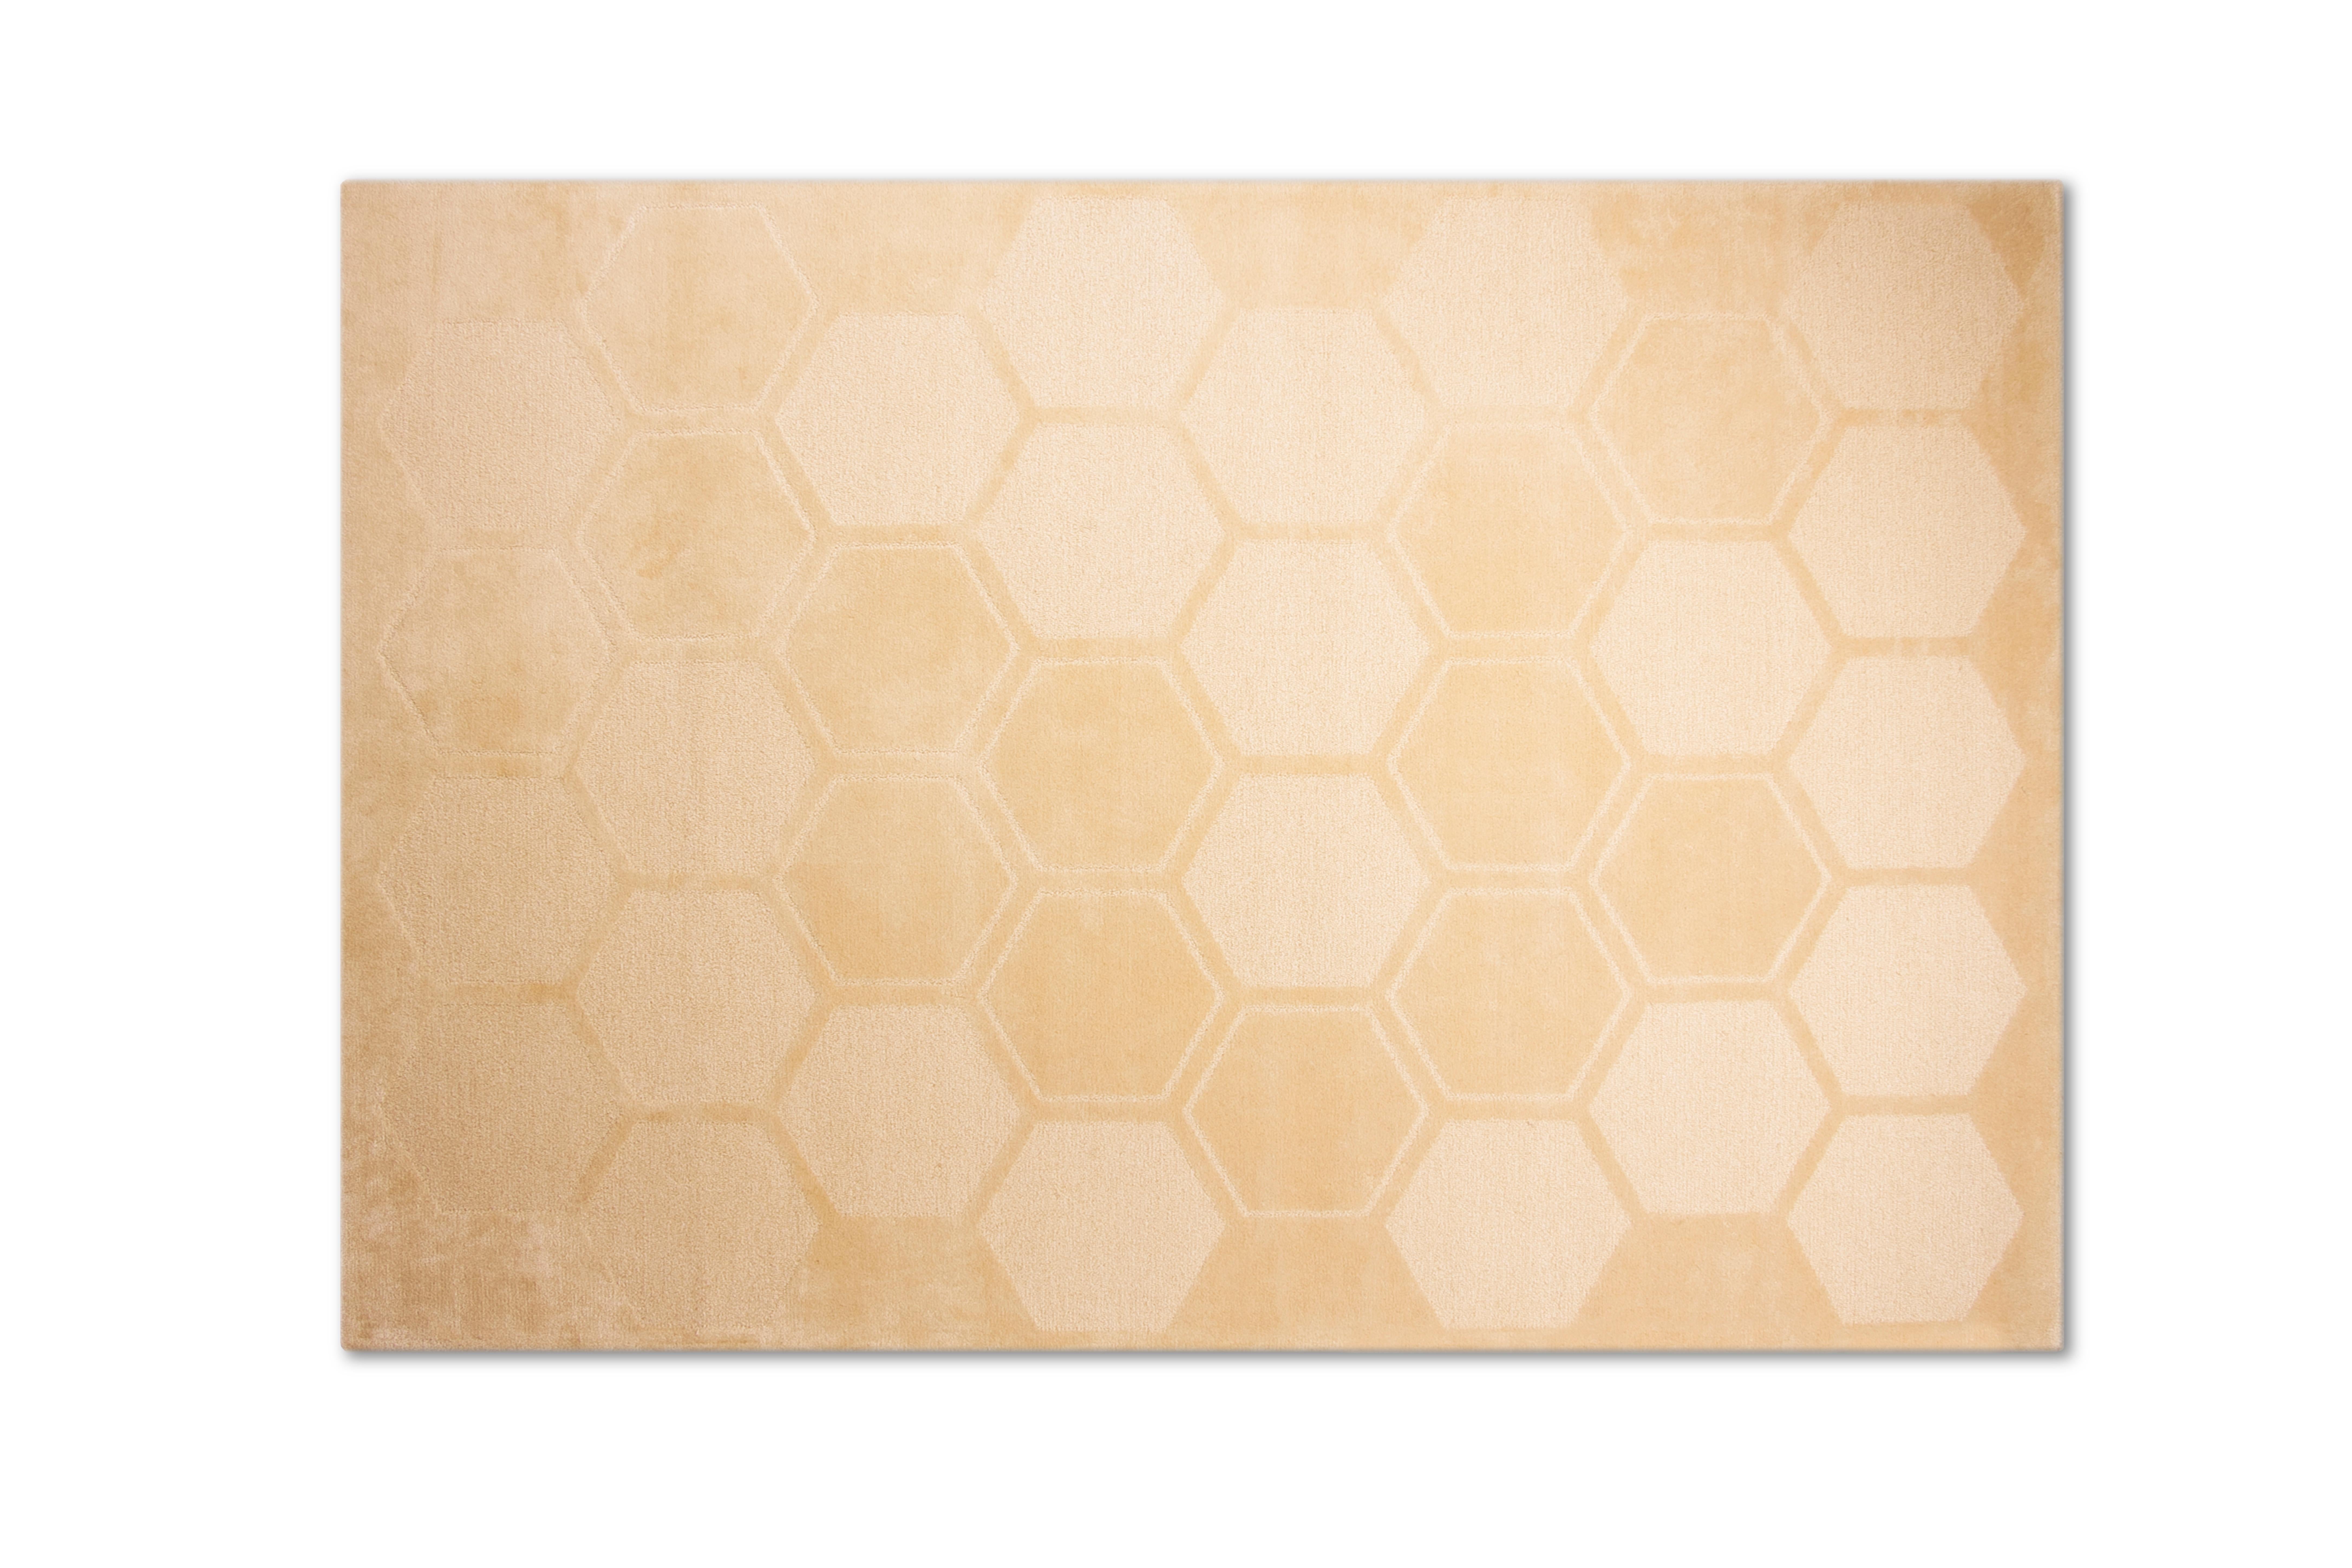 Honeycomb rug by Royal Stranger

Dimentions: 350 x 240 x 1.5 cm
Materials: Wool and silk

The Honeycomb rug completes the line using the wonderful pattern of the honeycomb and gives a sense of comfort and luxury to your space.

Royal stranger